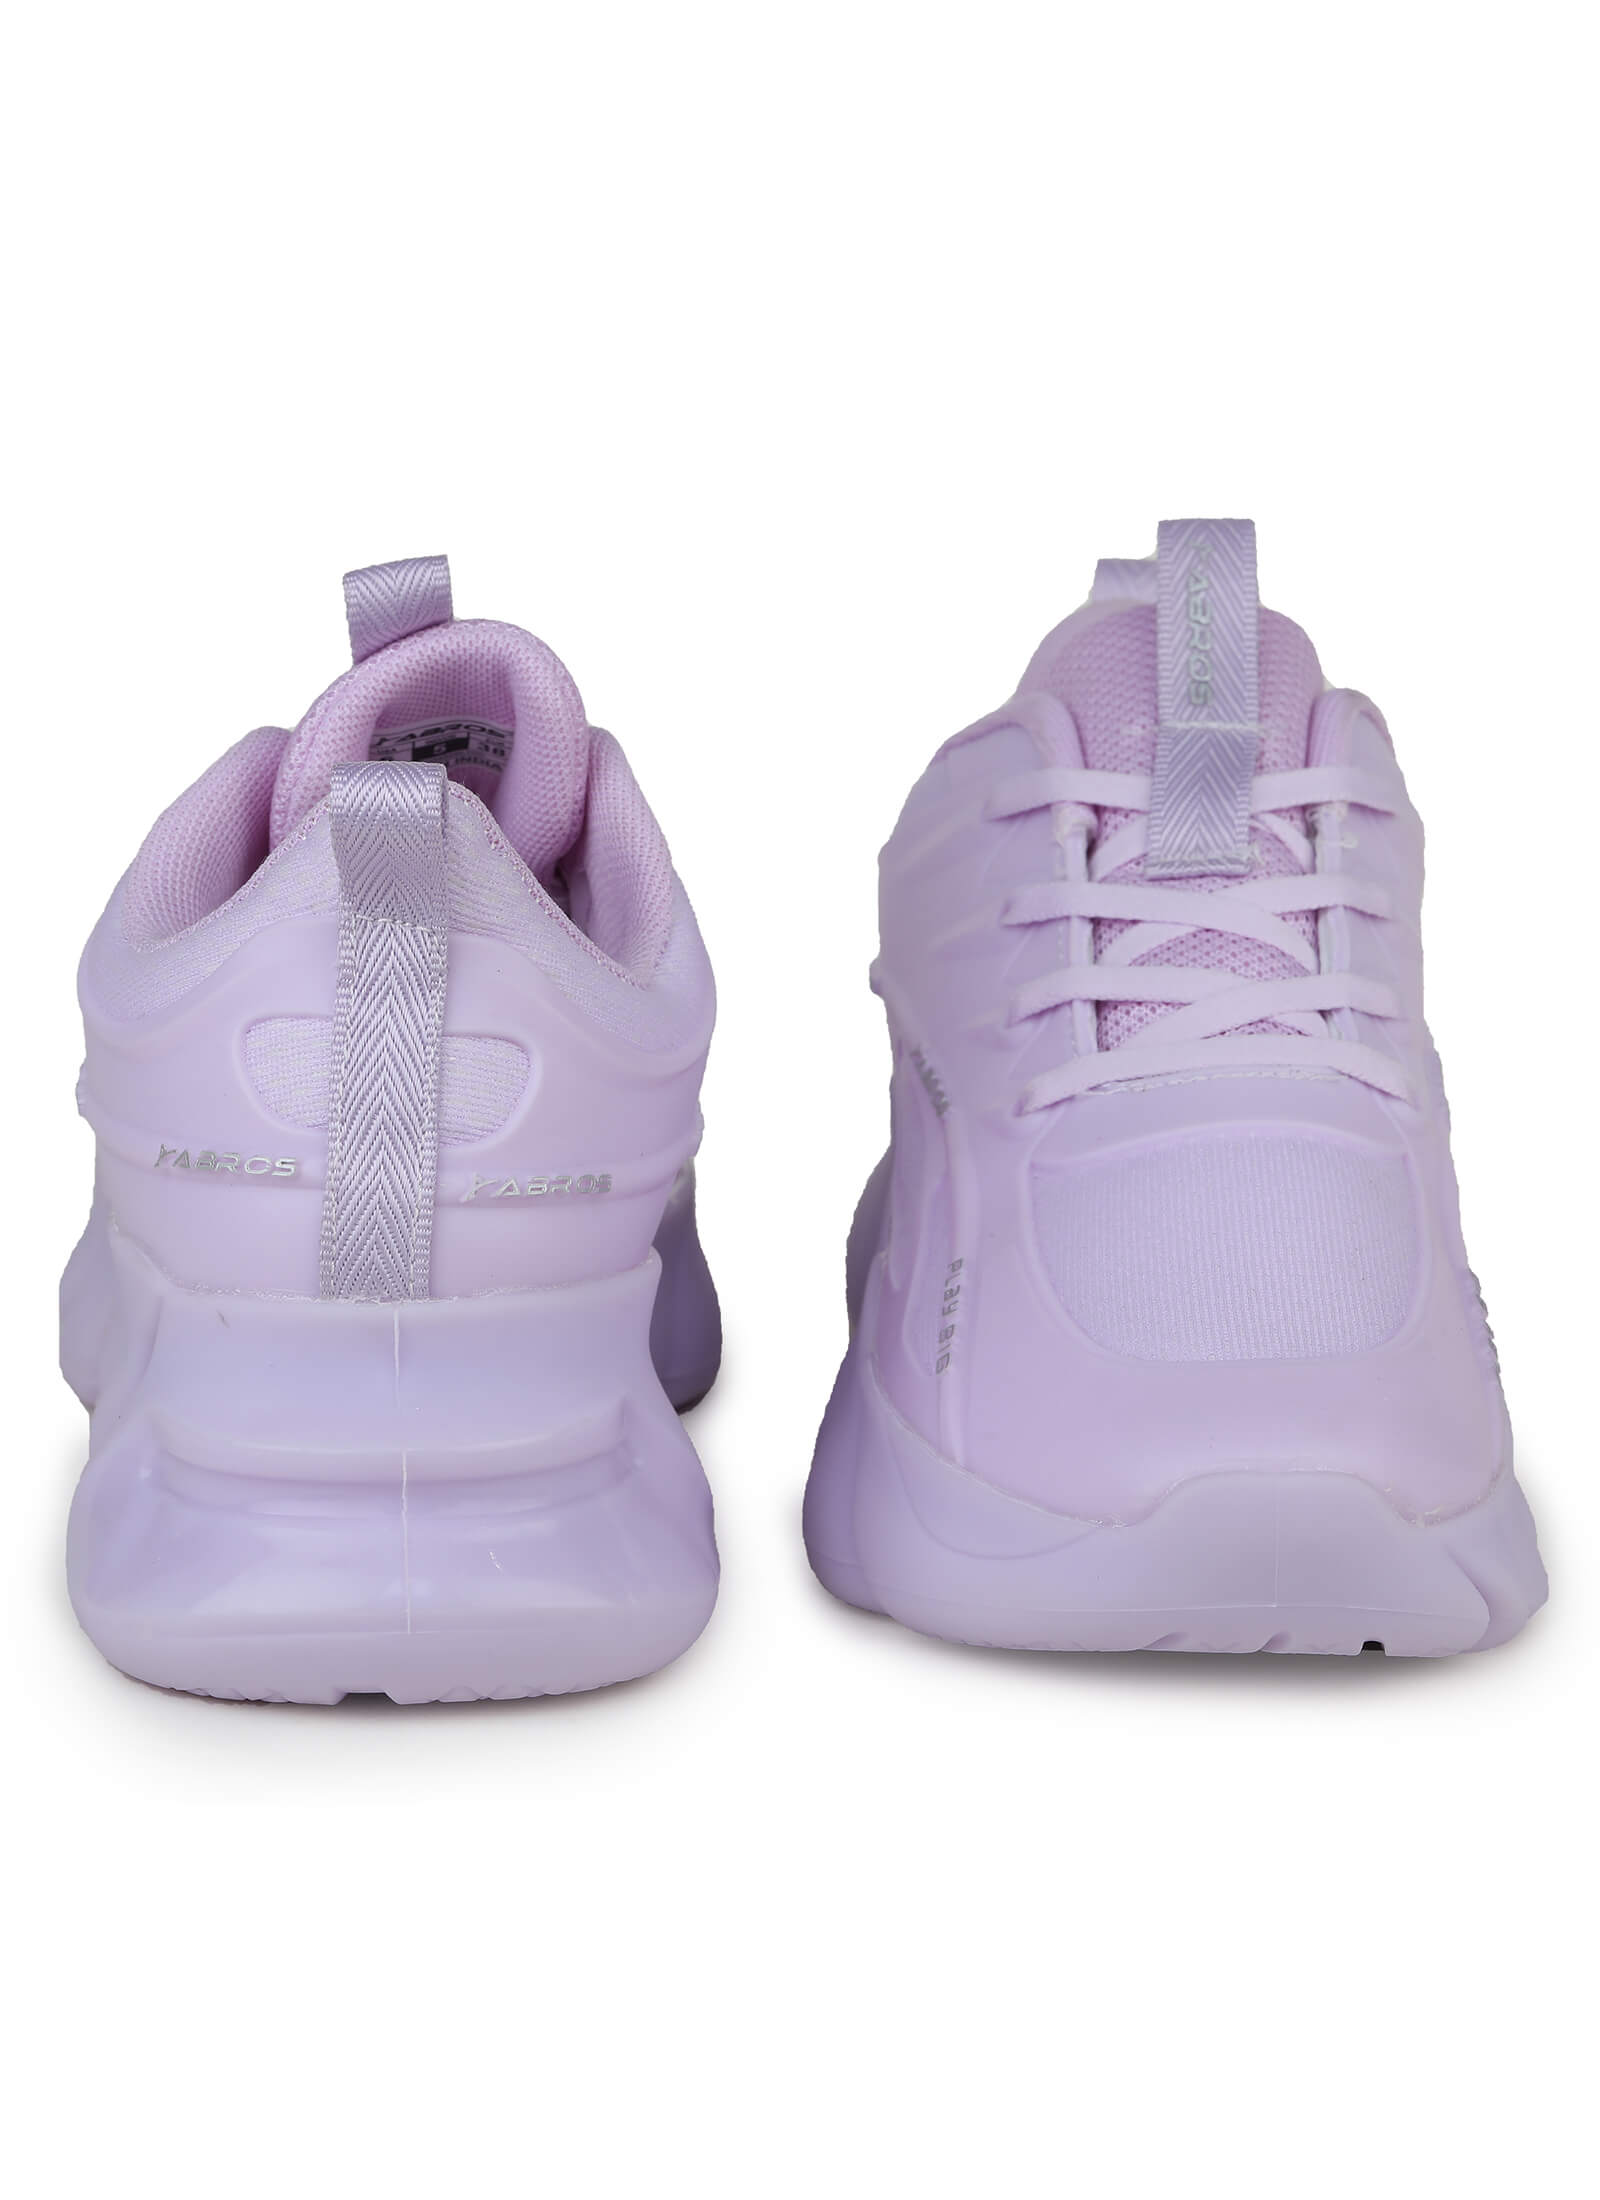 Angel-3 Sports Shoes For Women